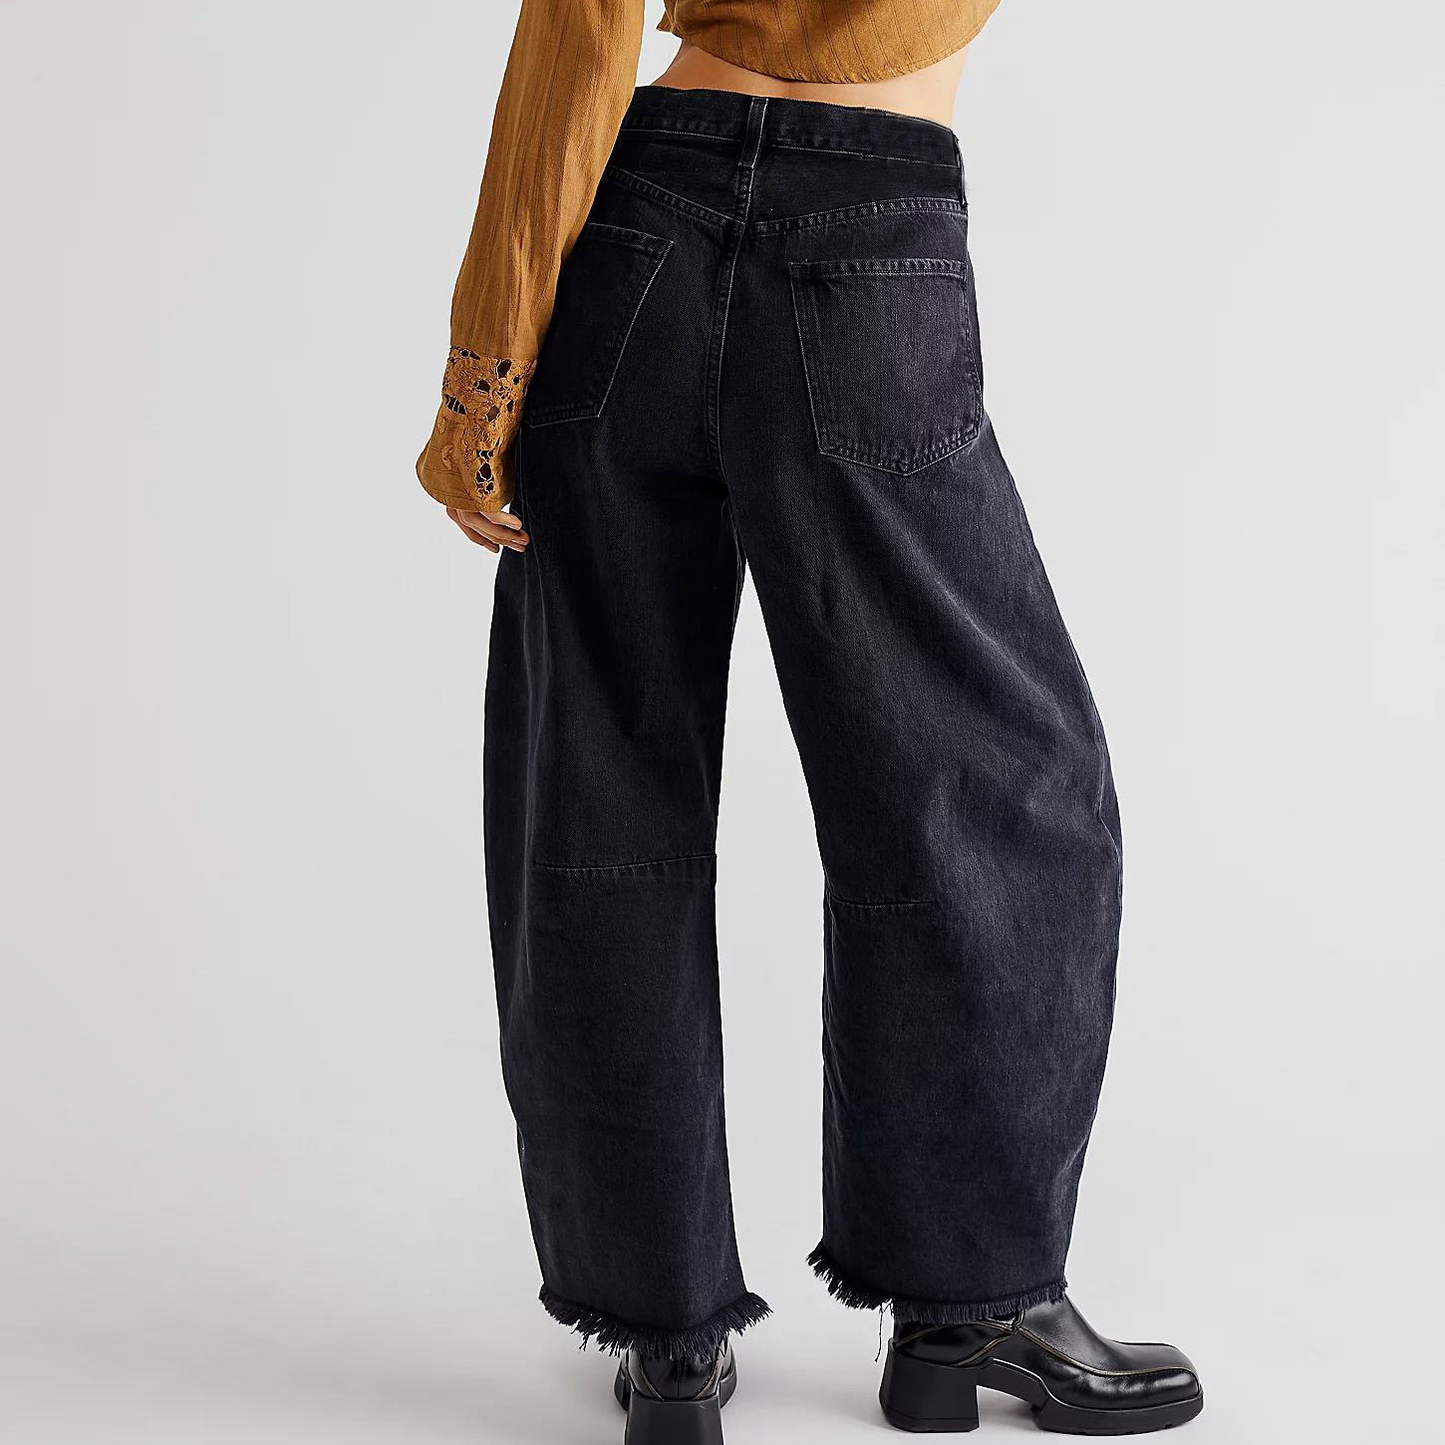 High-waisted loose-fitting straight leg pants